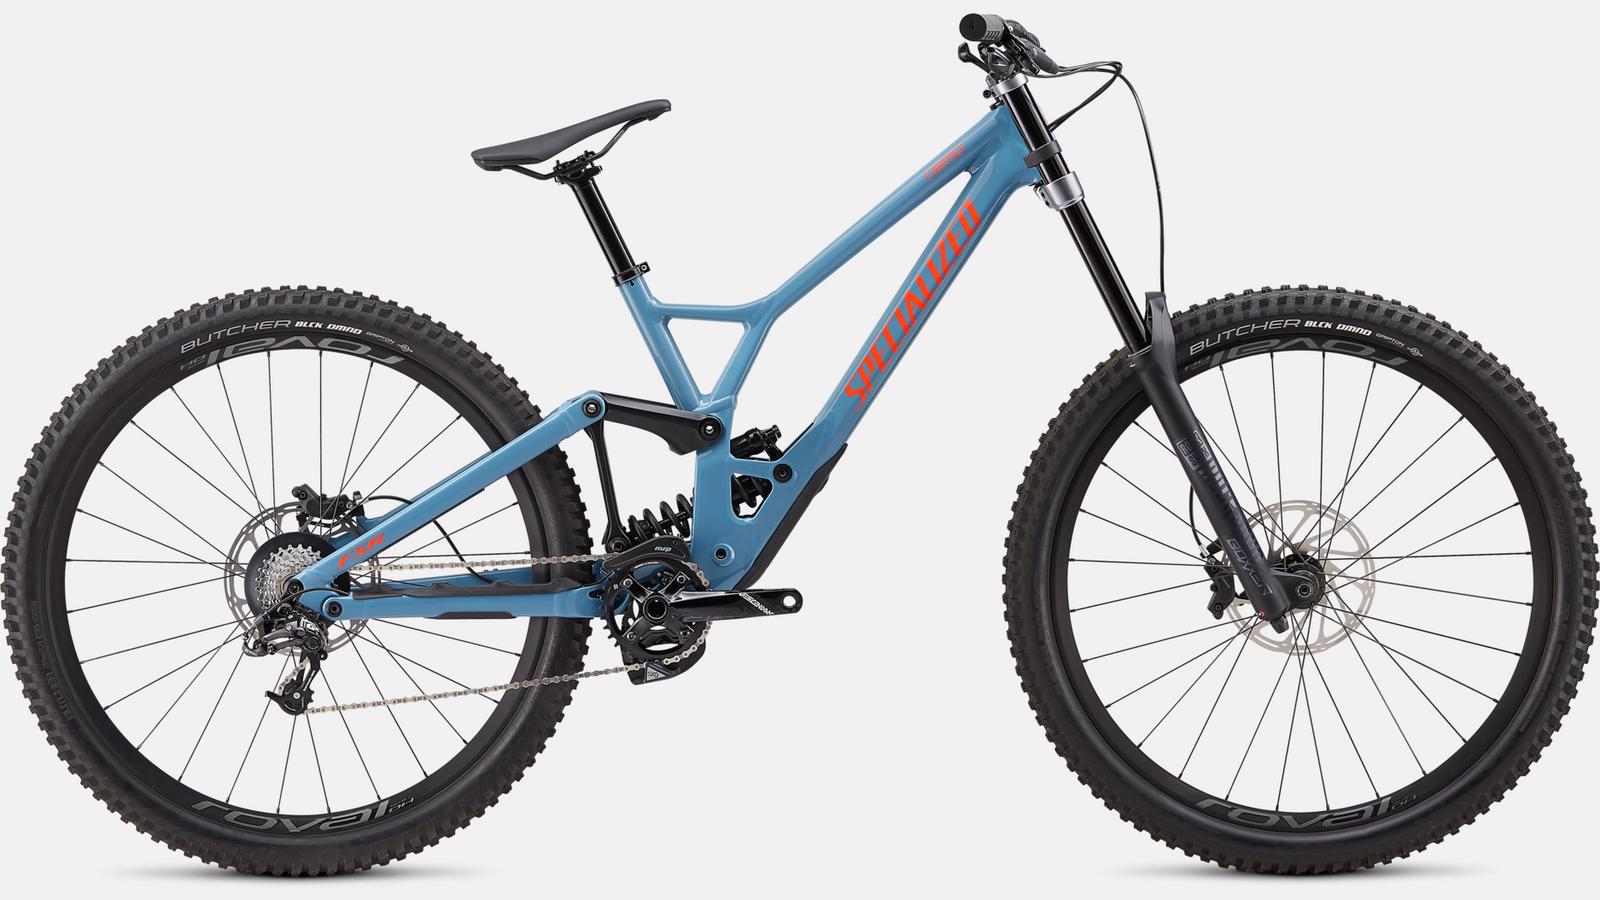 Paint for 2019 Specialized Demo Expert 29 - Gloss Storm Grey